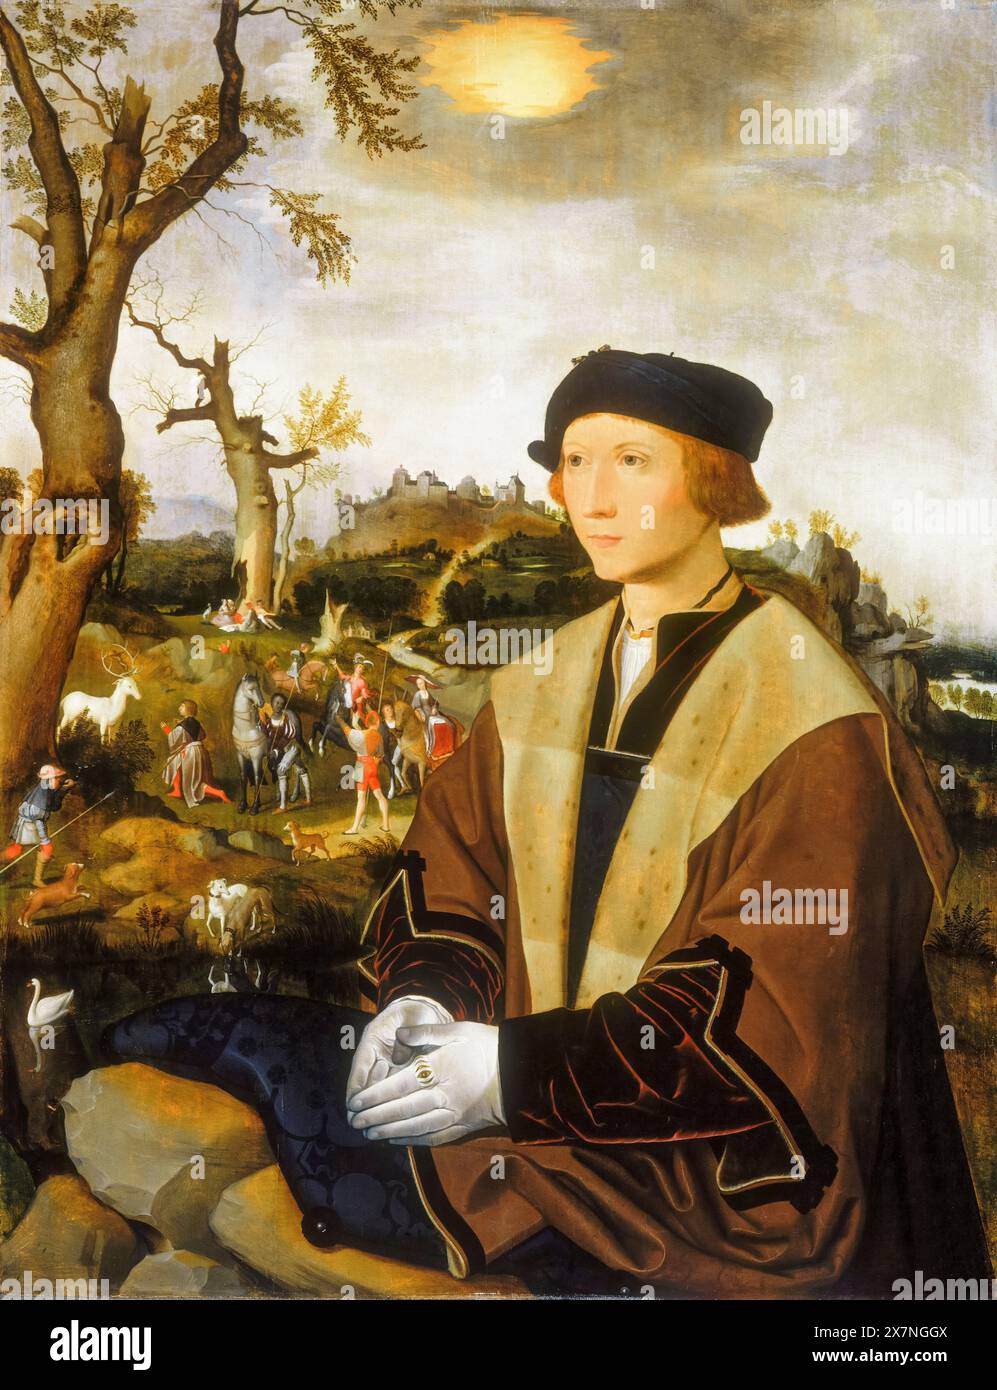 Jan Mostaert, Portrait of a Young Man, painting in oil and tempera on panel, 1530-1540 Stock Photo